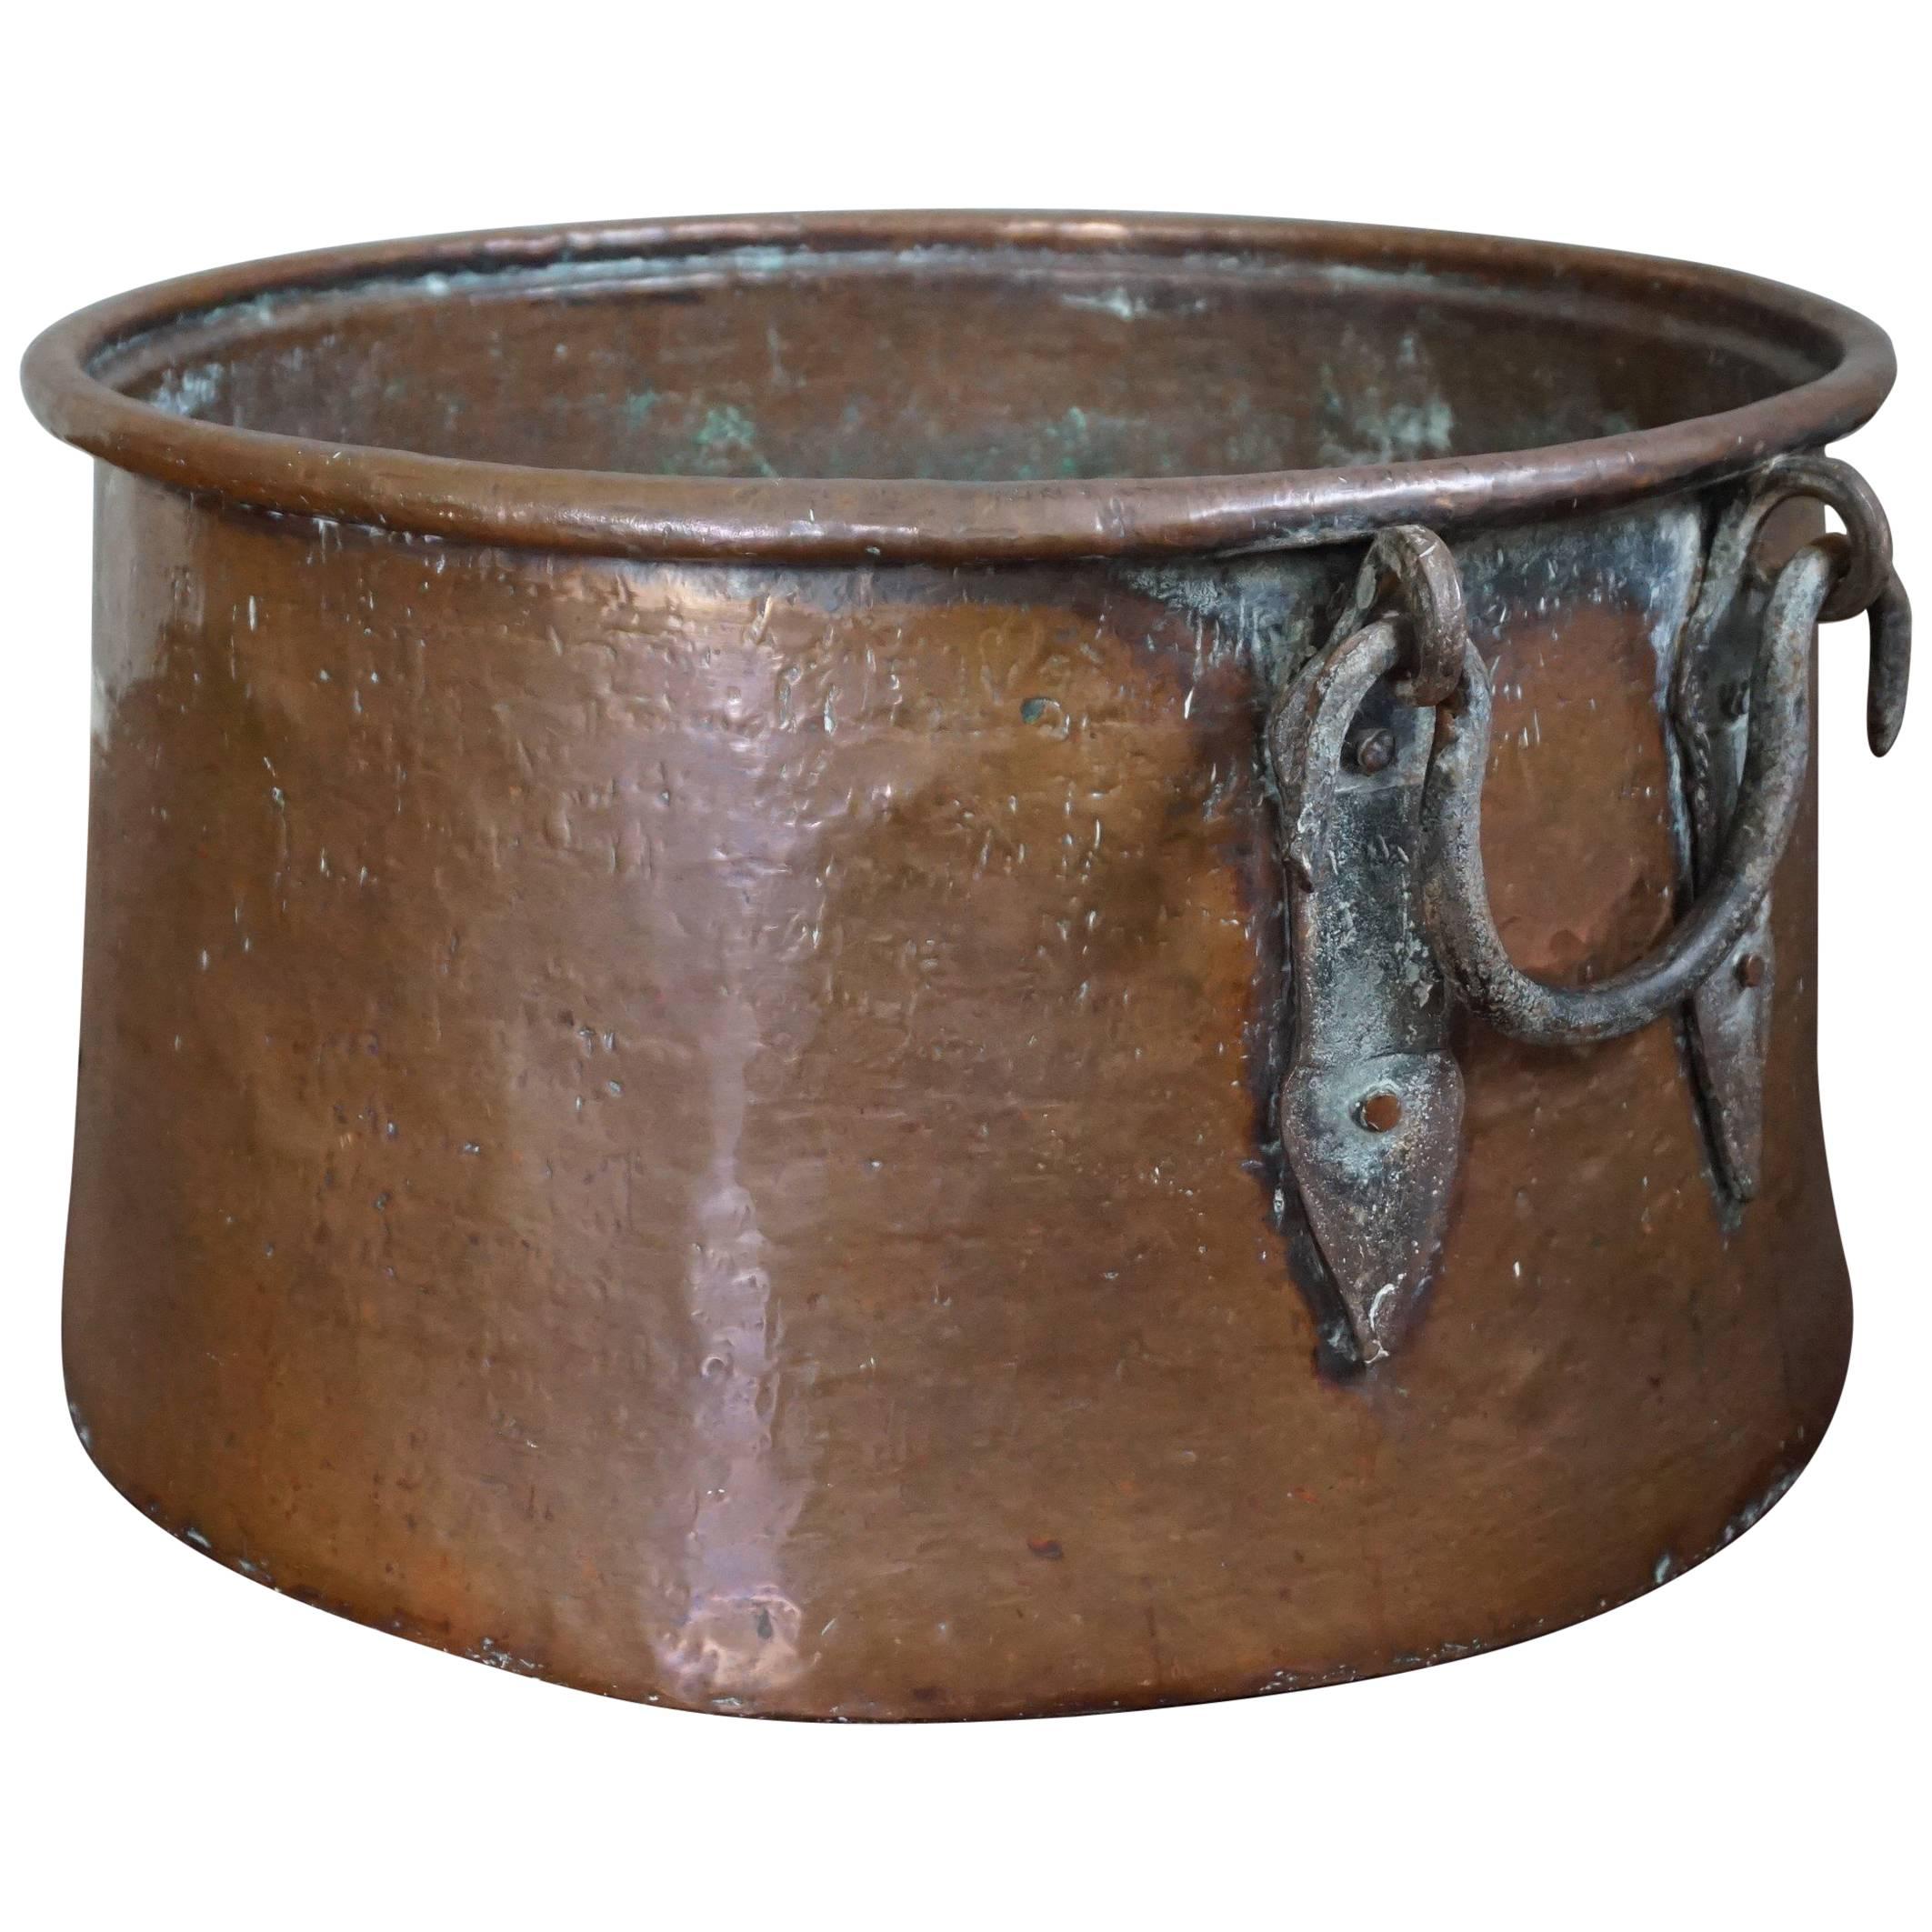 Antique, Large & Decorative Hand Hammered Copper & Wrought Iron Firewood Bucket